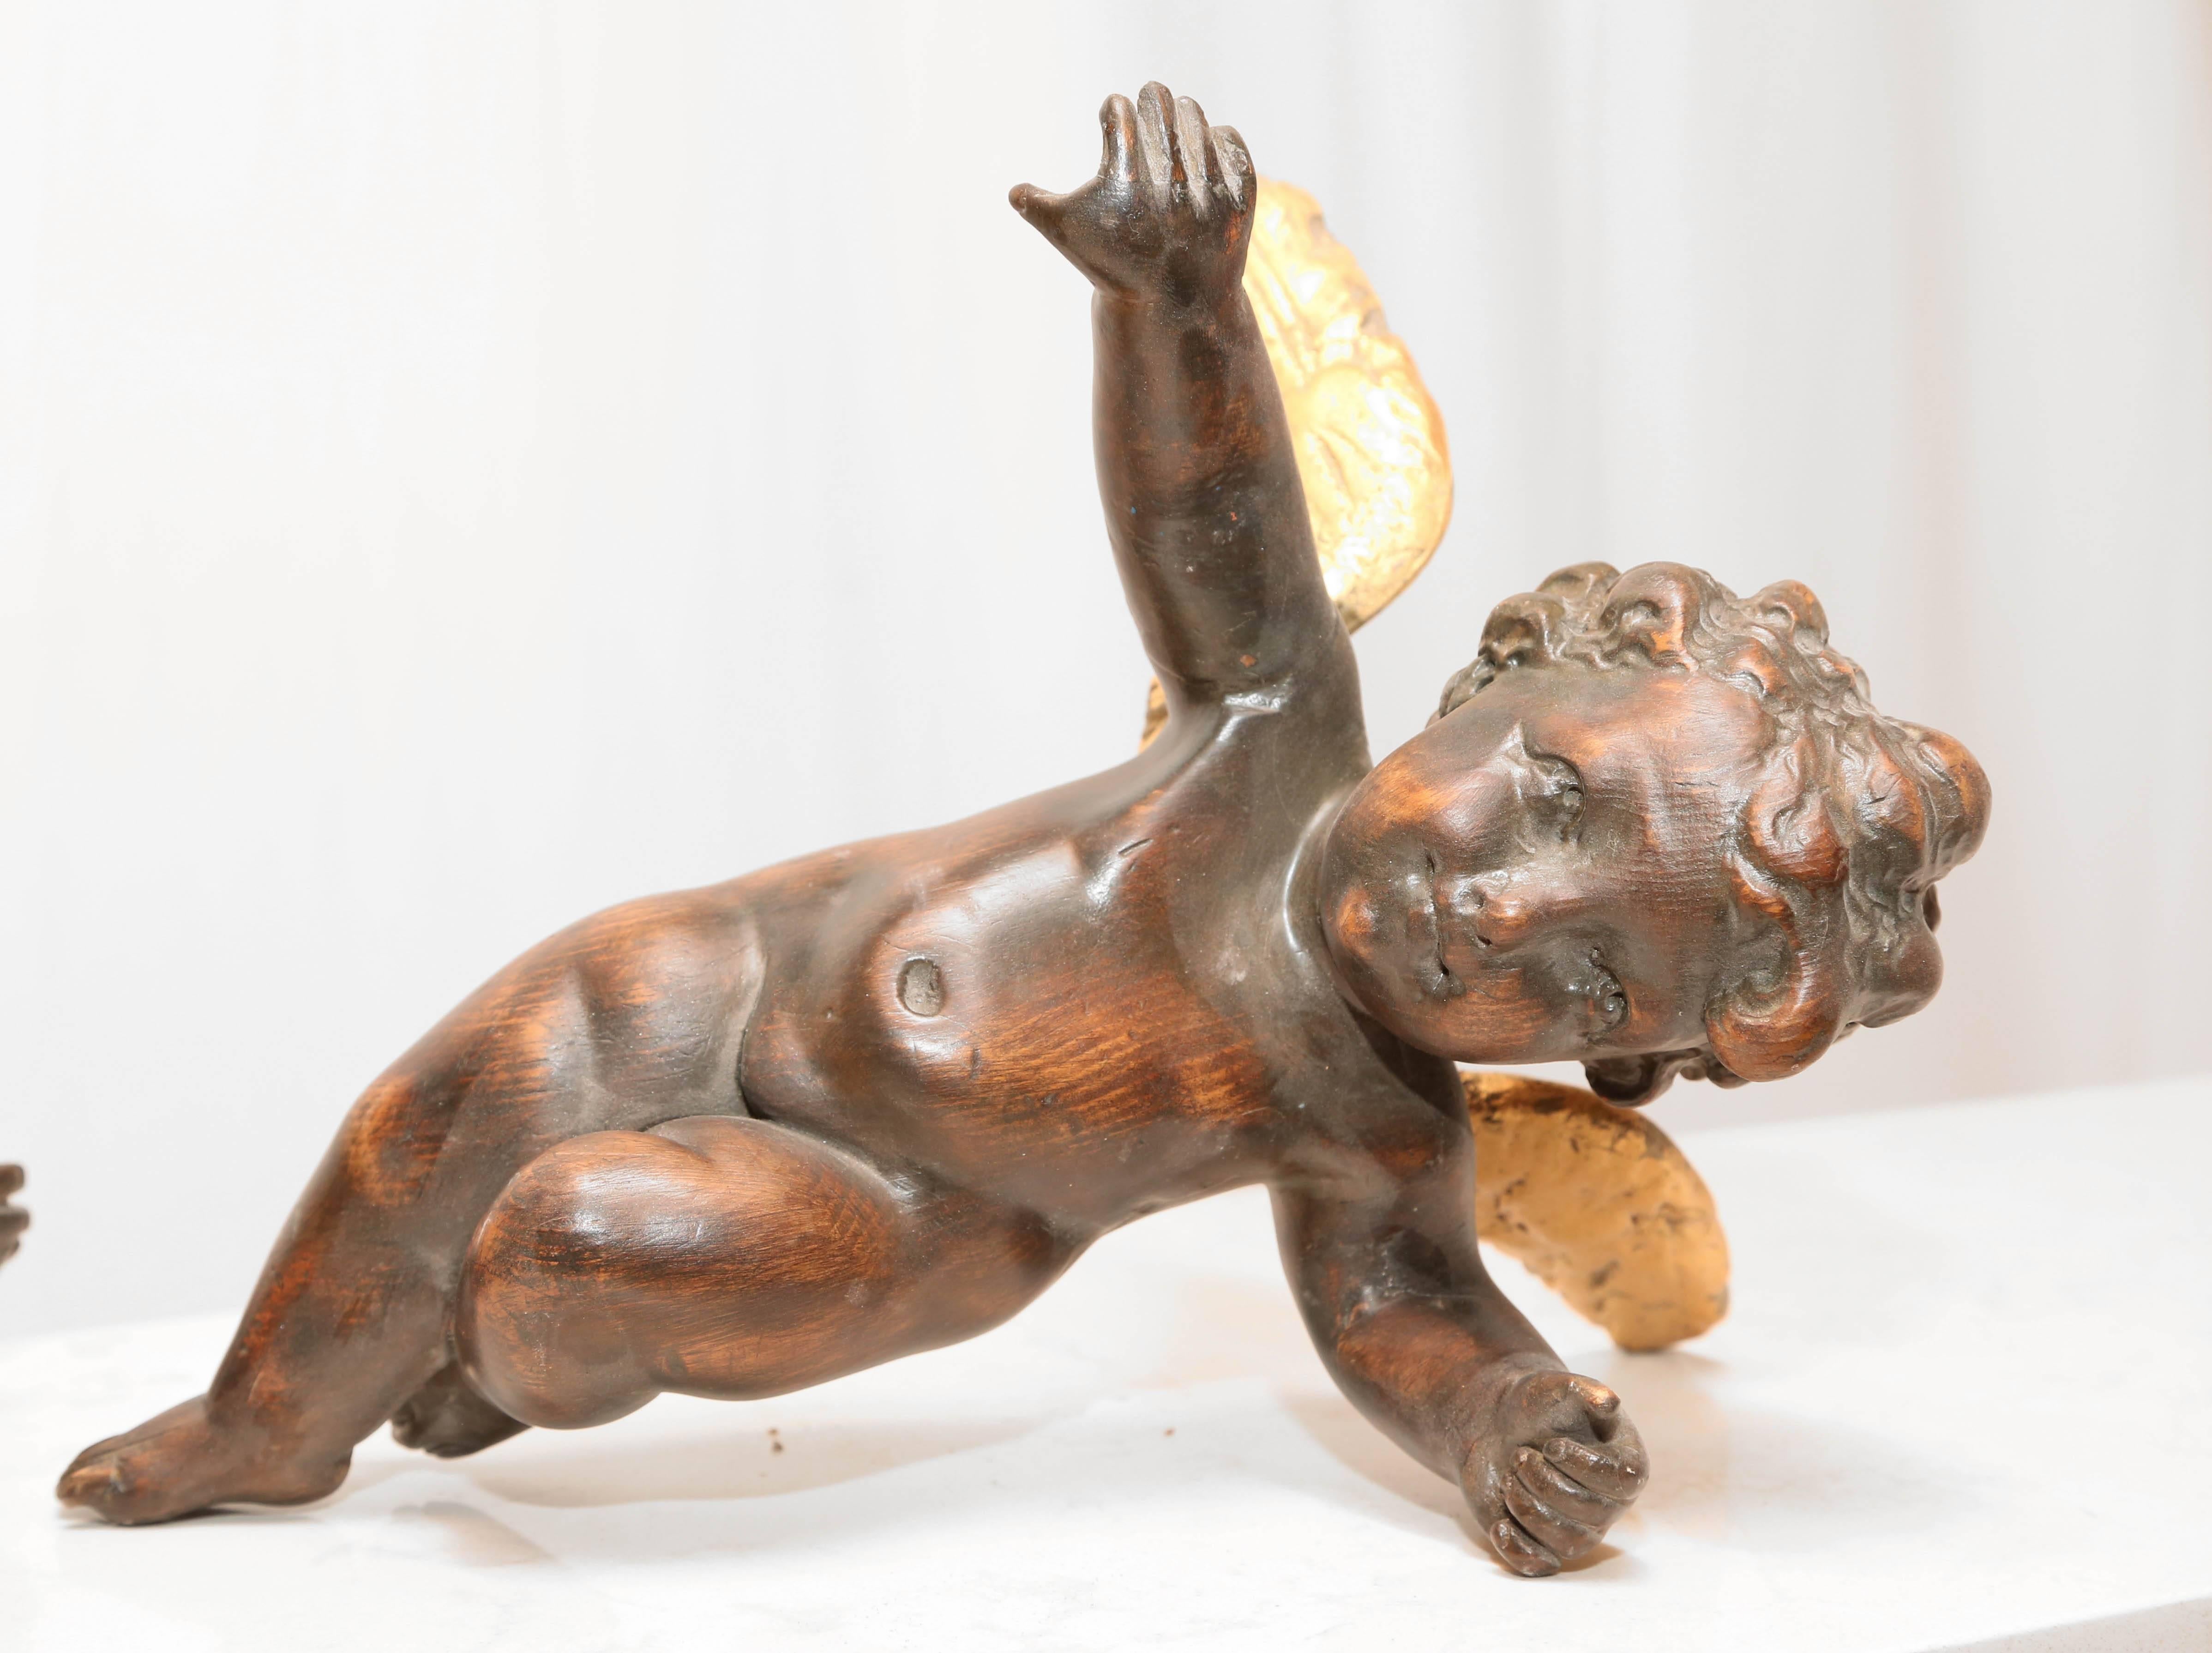 
Pair of 19th century carved European Putti. Carved from pine with a dark stain with gold gilt wings. Dimensions are 13